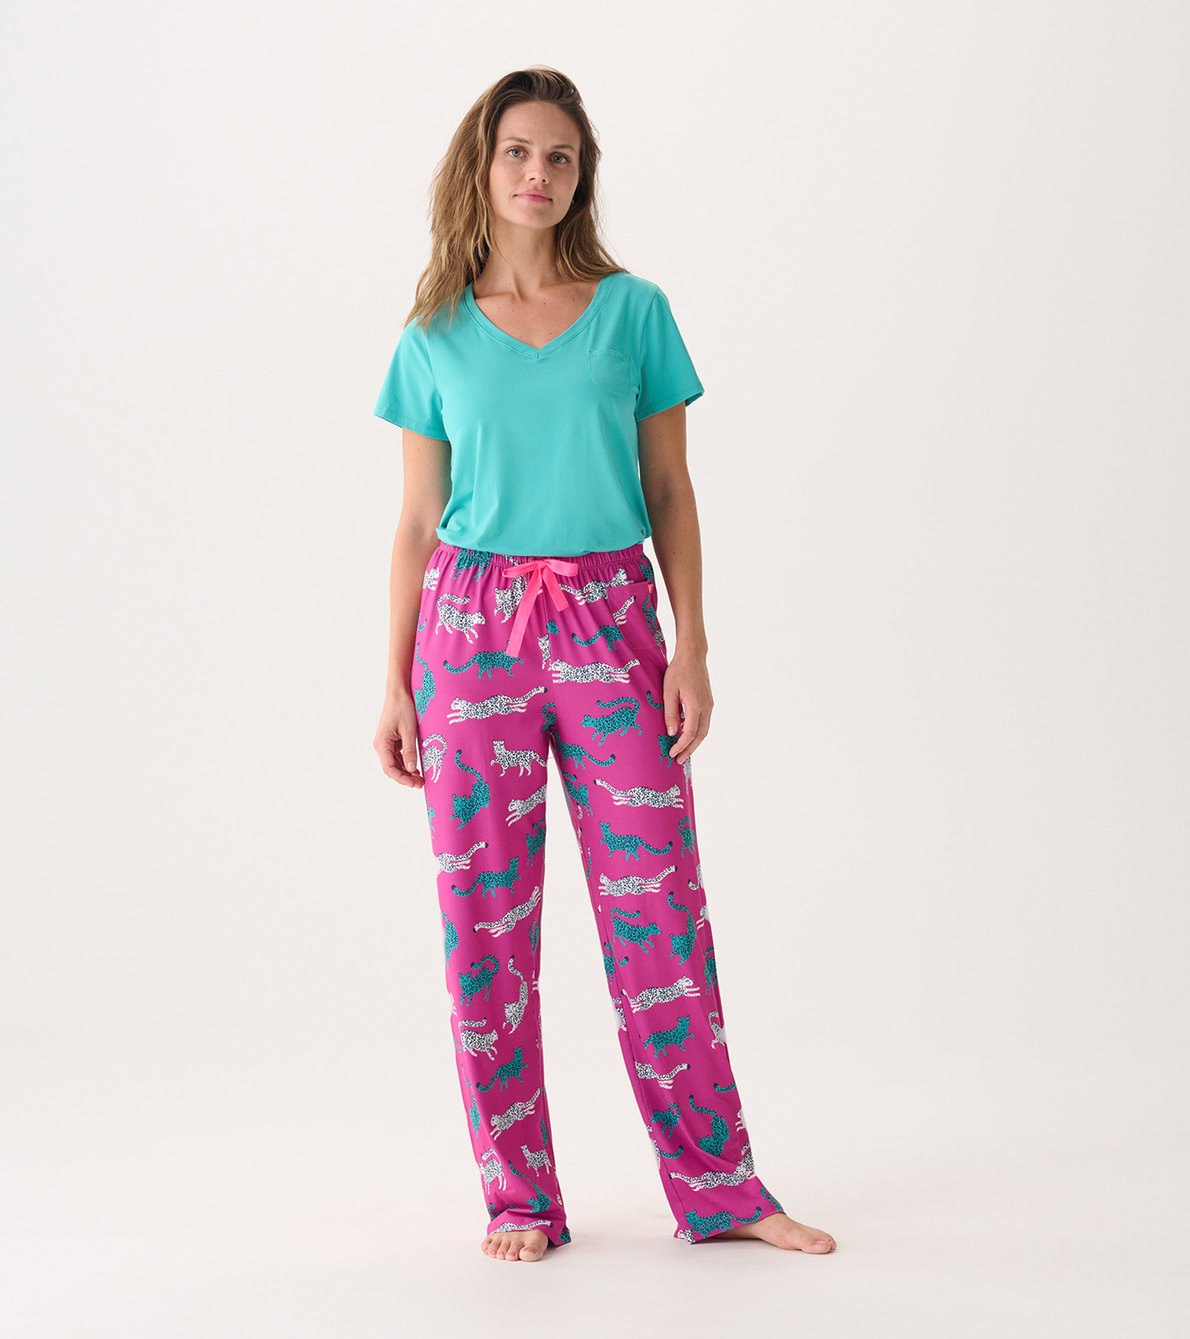 View larger image of Capelton Road Women's Cheetah T-Shirt and Pants